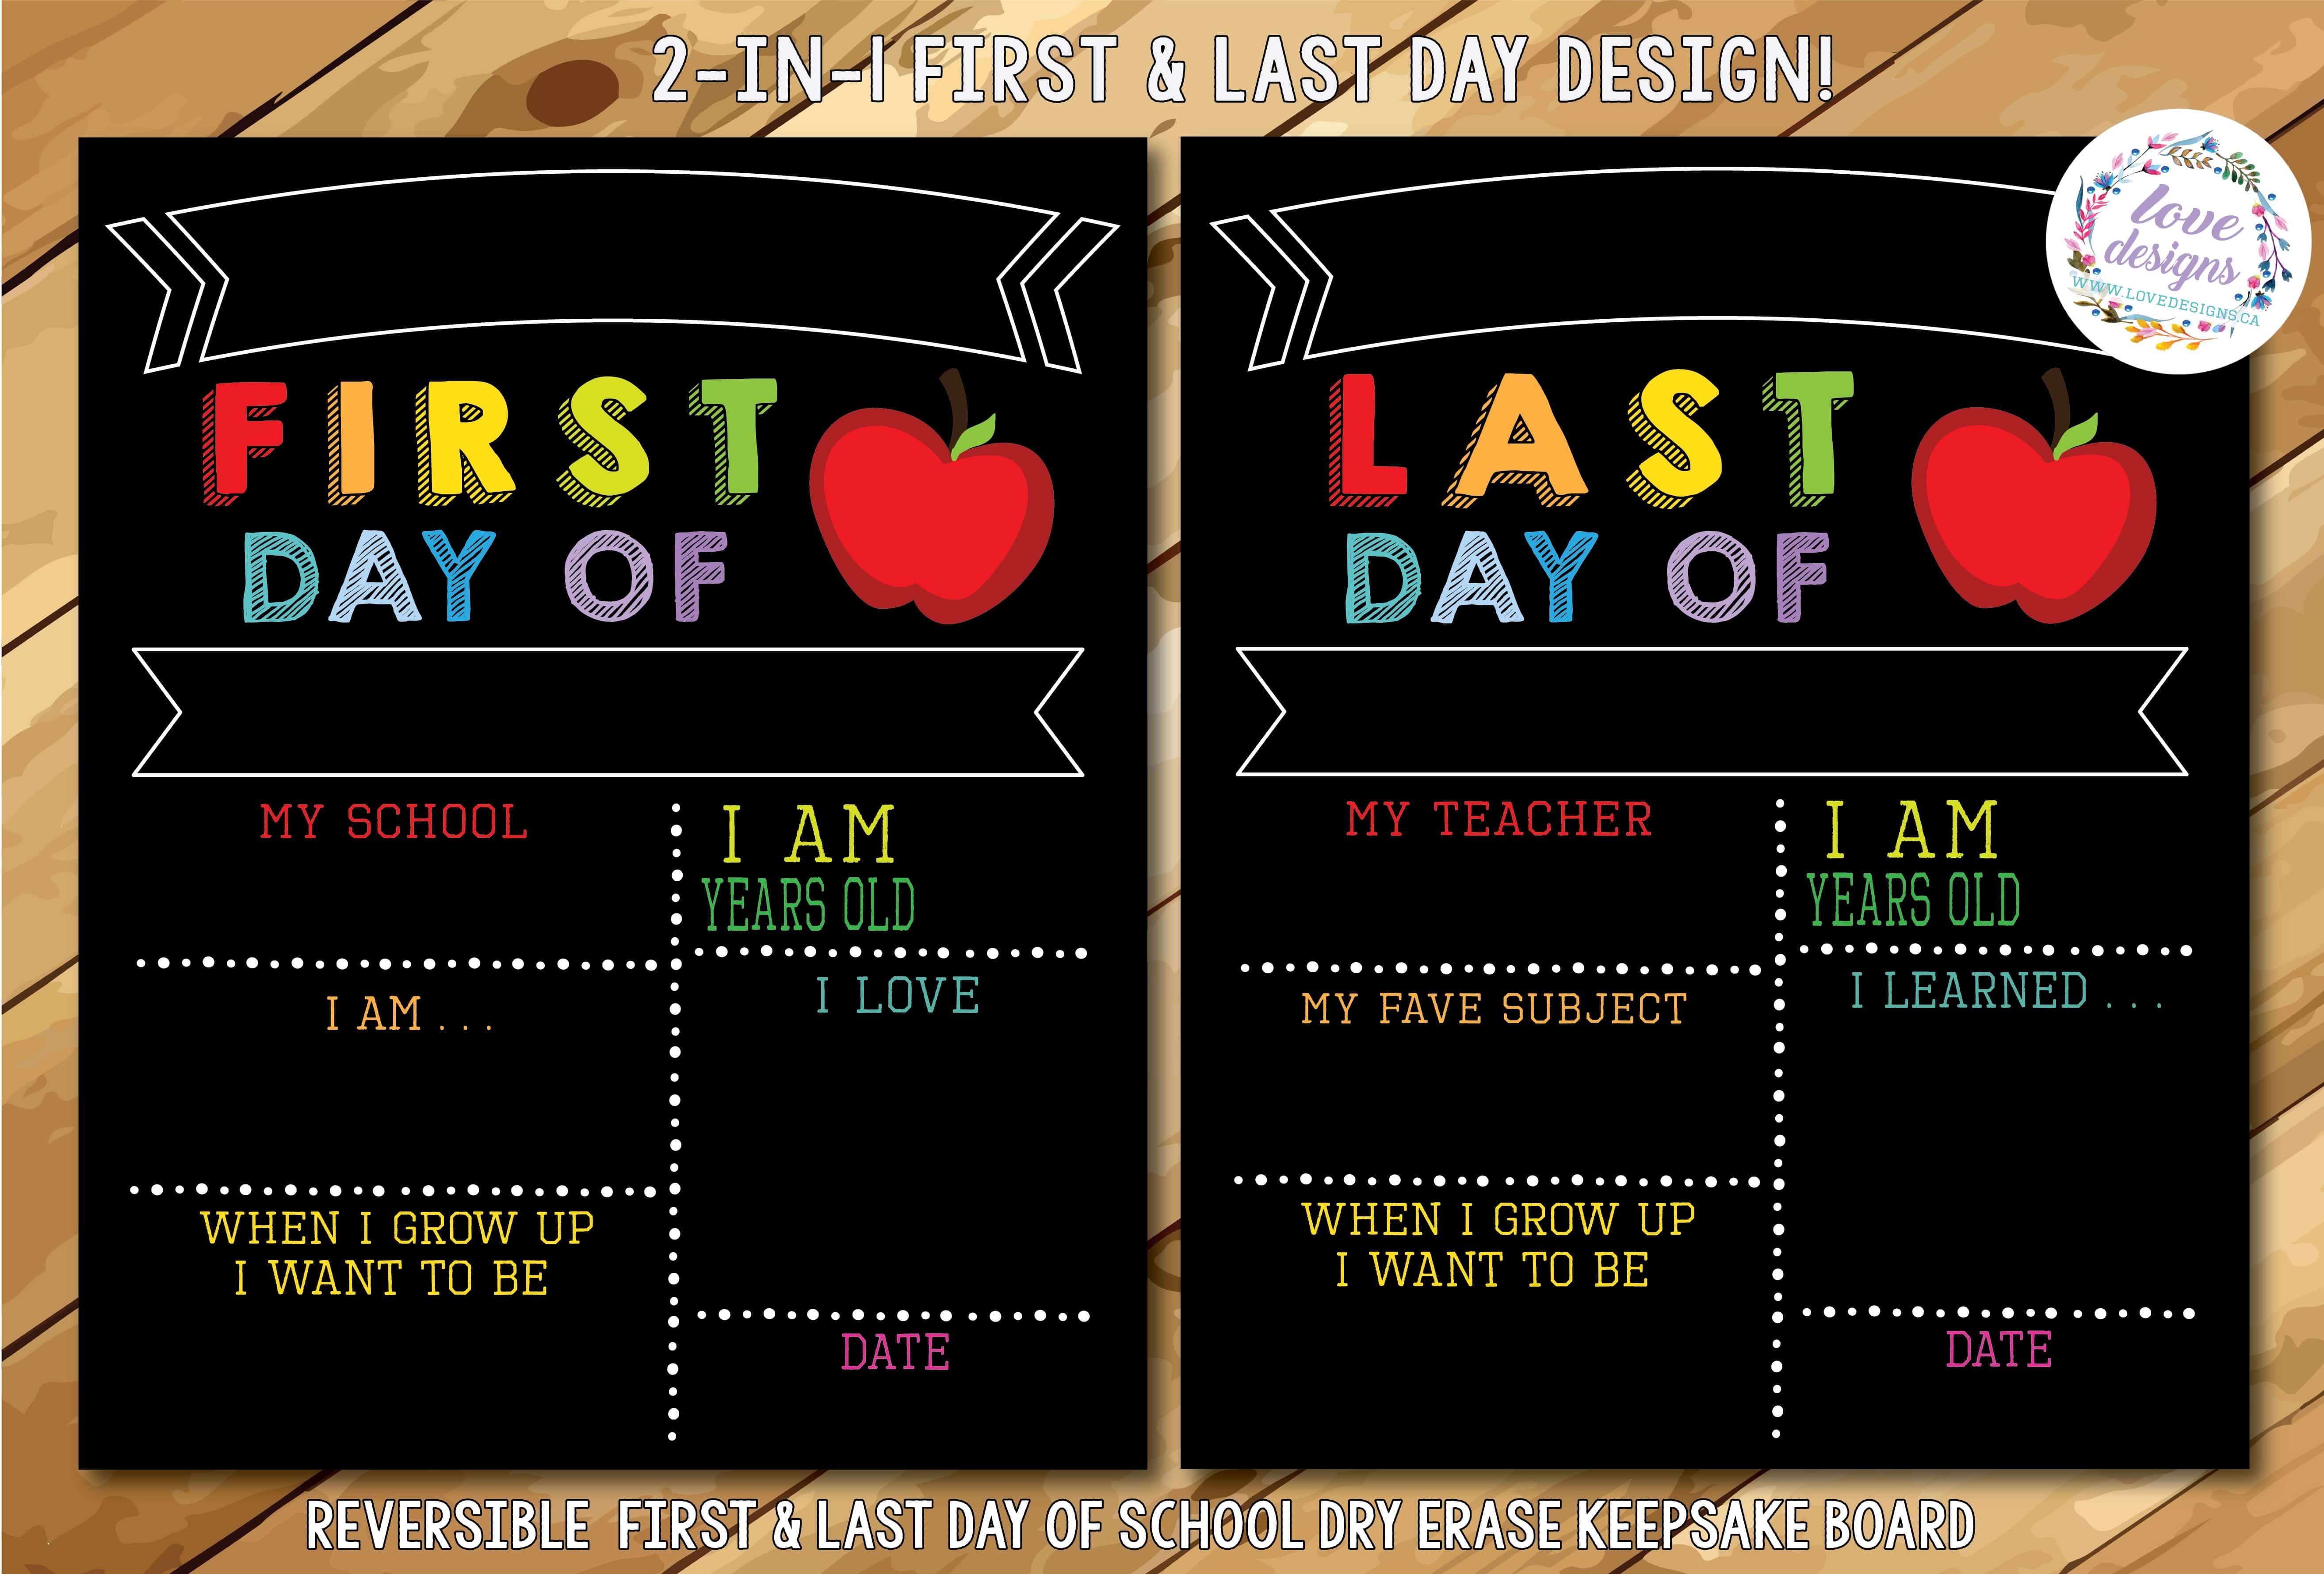 First & Last Day of School Sign - Apple | Love Designs